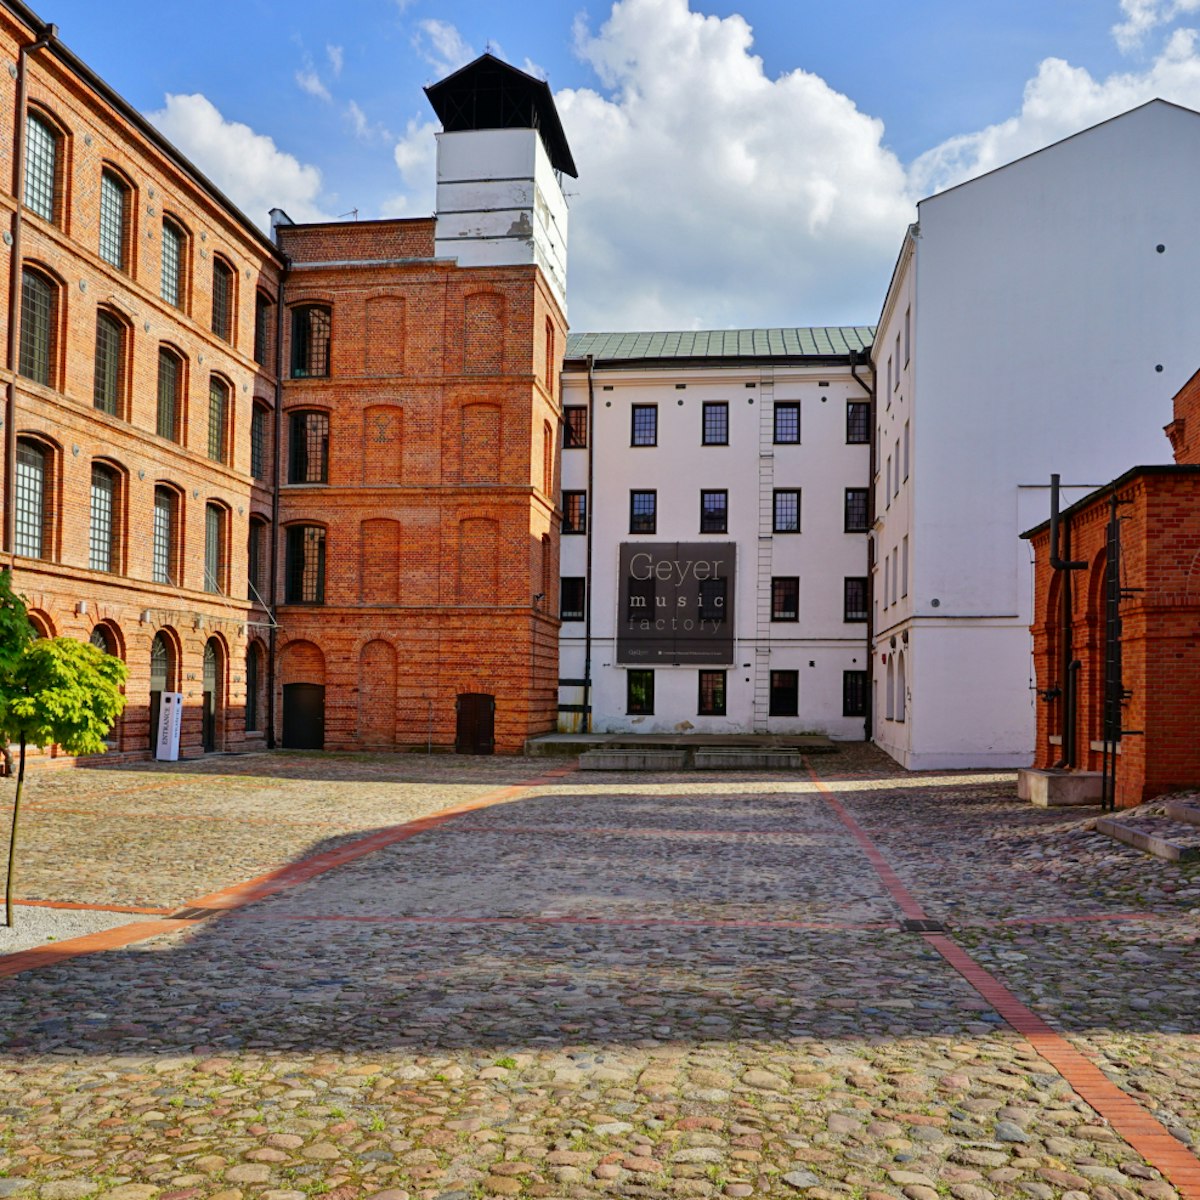 LODZ,POLAND, CENTRAL MUSEUM OF TEXTILES , APRIL, 27, 2018:The White Factory presently the seat of the Central Museum of Textiles, Lodz, Poland; Shutterstock ID 1085771489; Your name (First / Last): Gemma Graham; GL account no.: 65050; Netsuite department name: Online Editorial; Full Product or Project name including edition: Lodz destination page